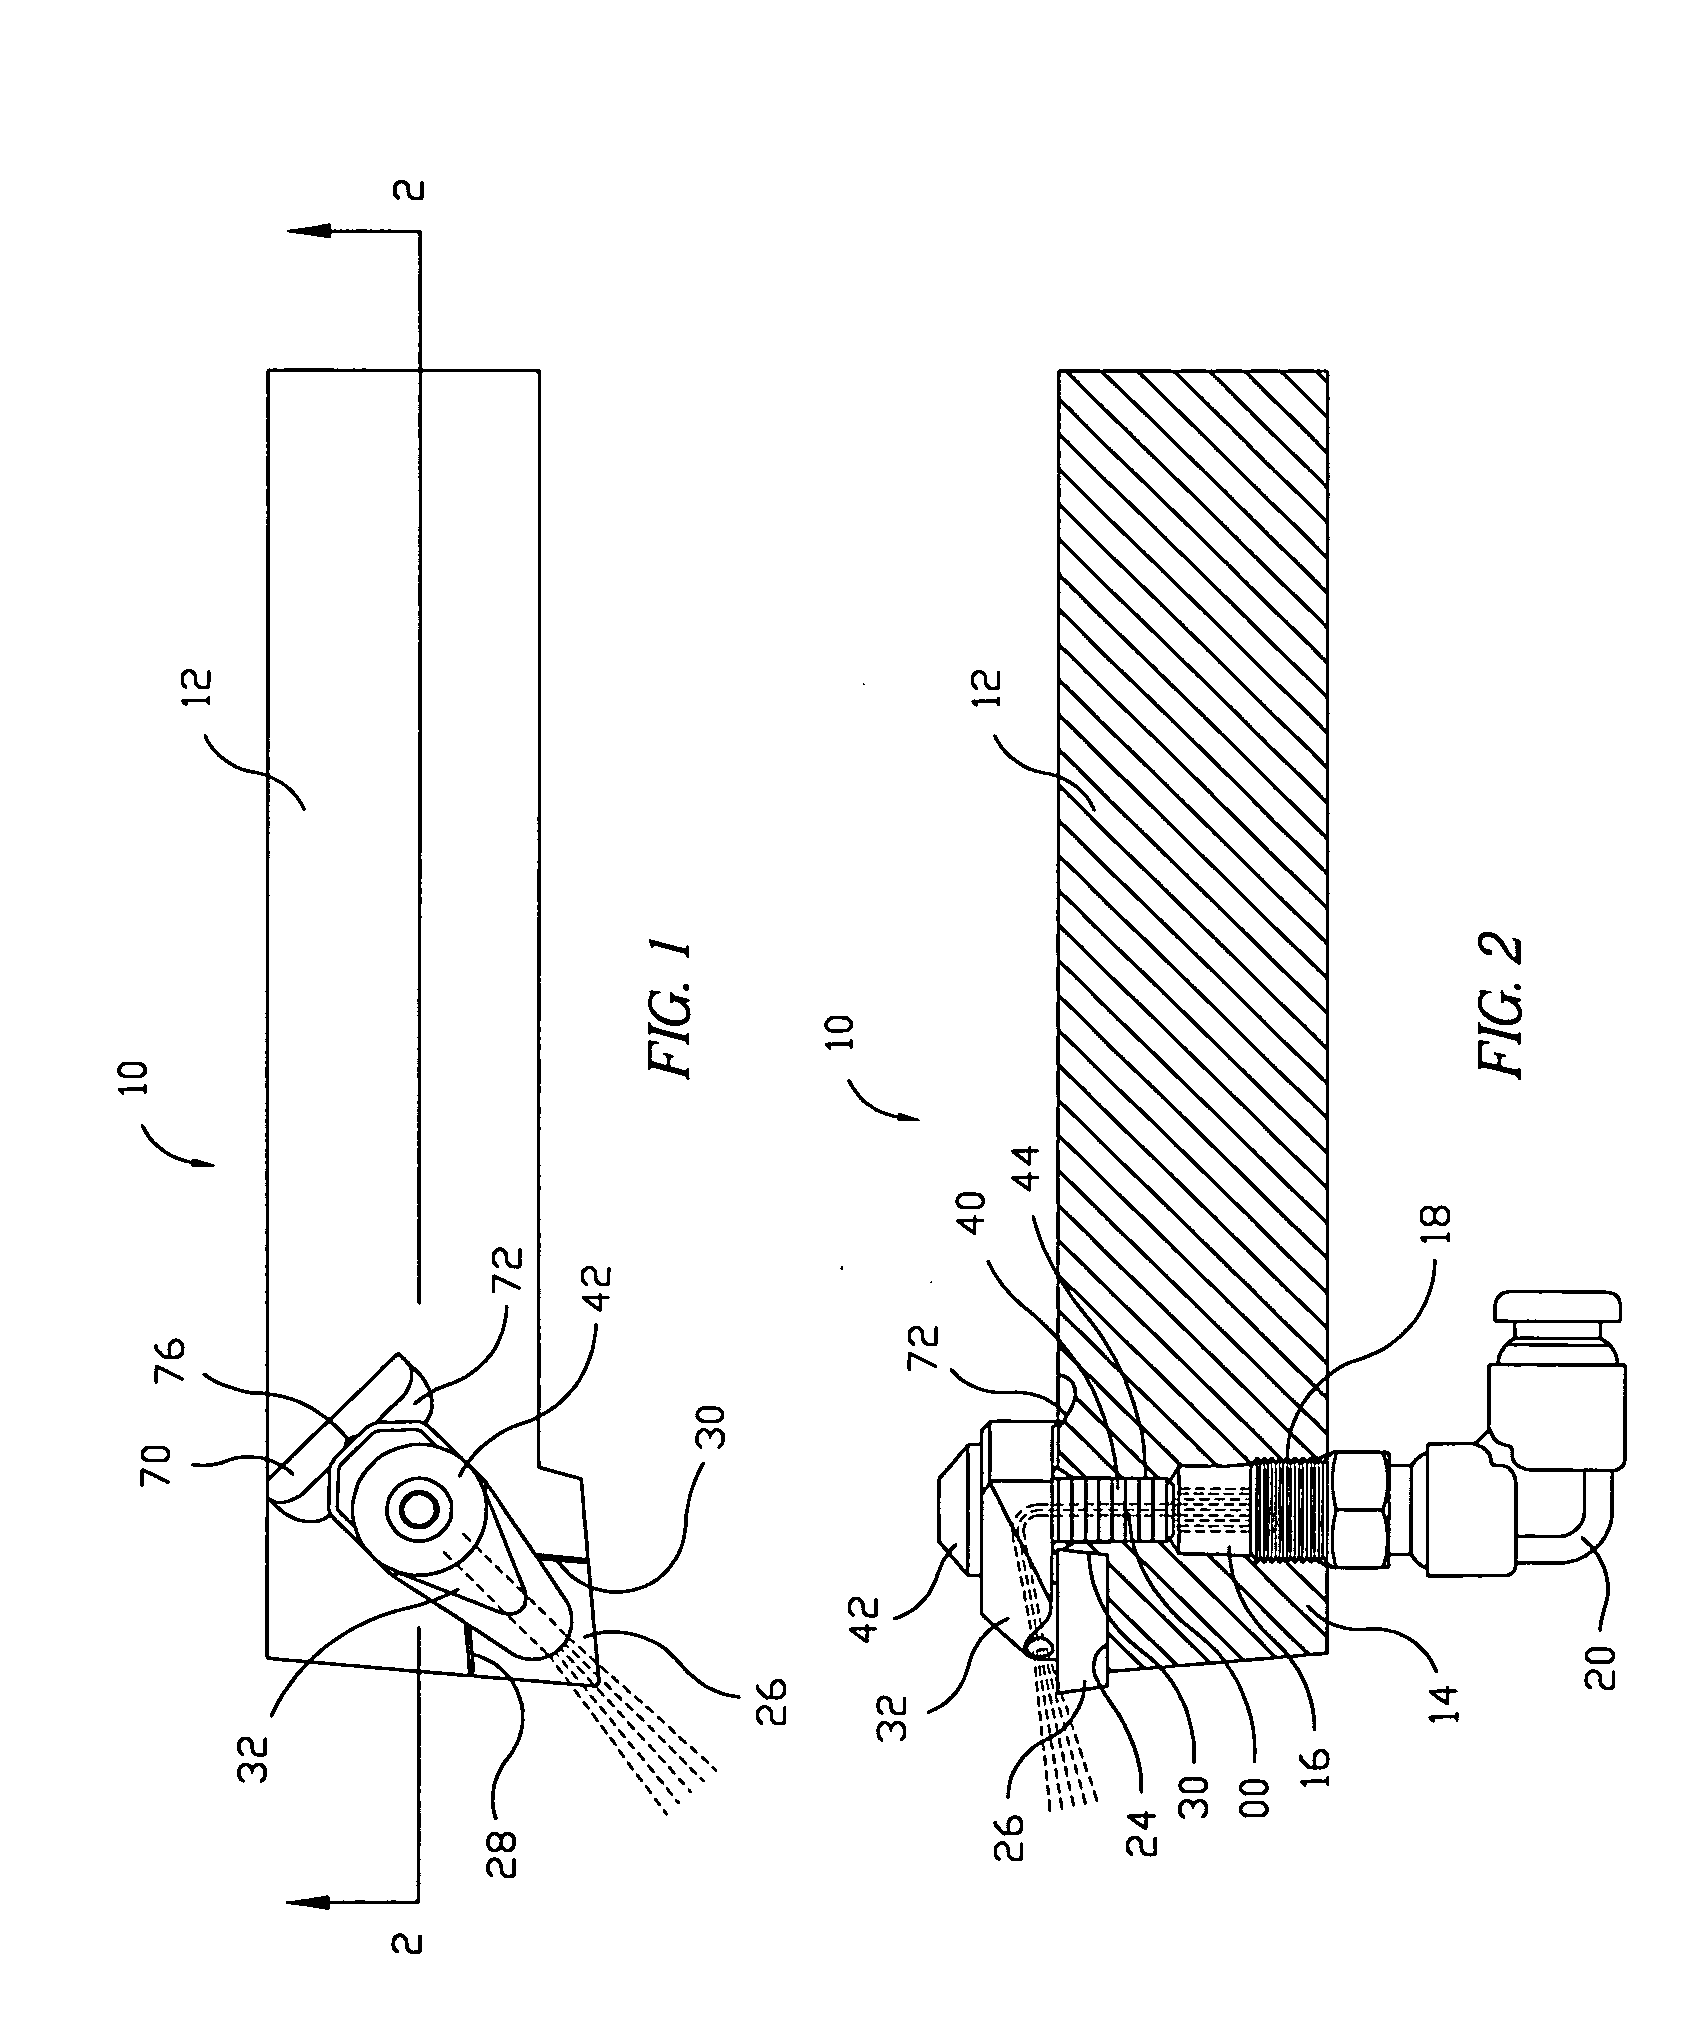 Machine tool holder having internal coolant supply and cutter retaining and coolant distribution cutter insert retaining clamp assembly